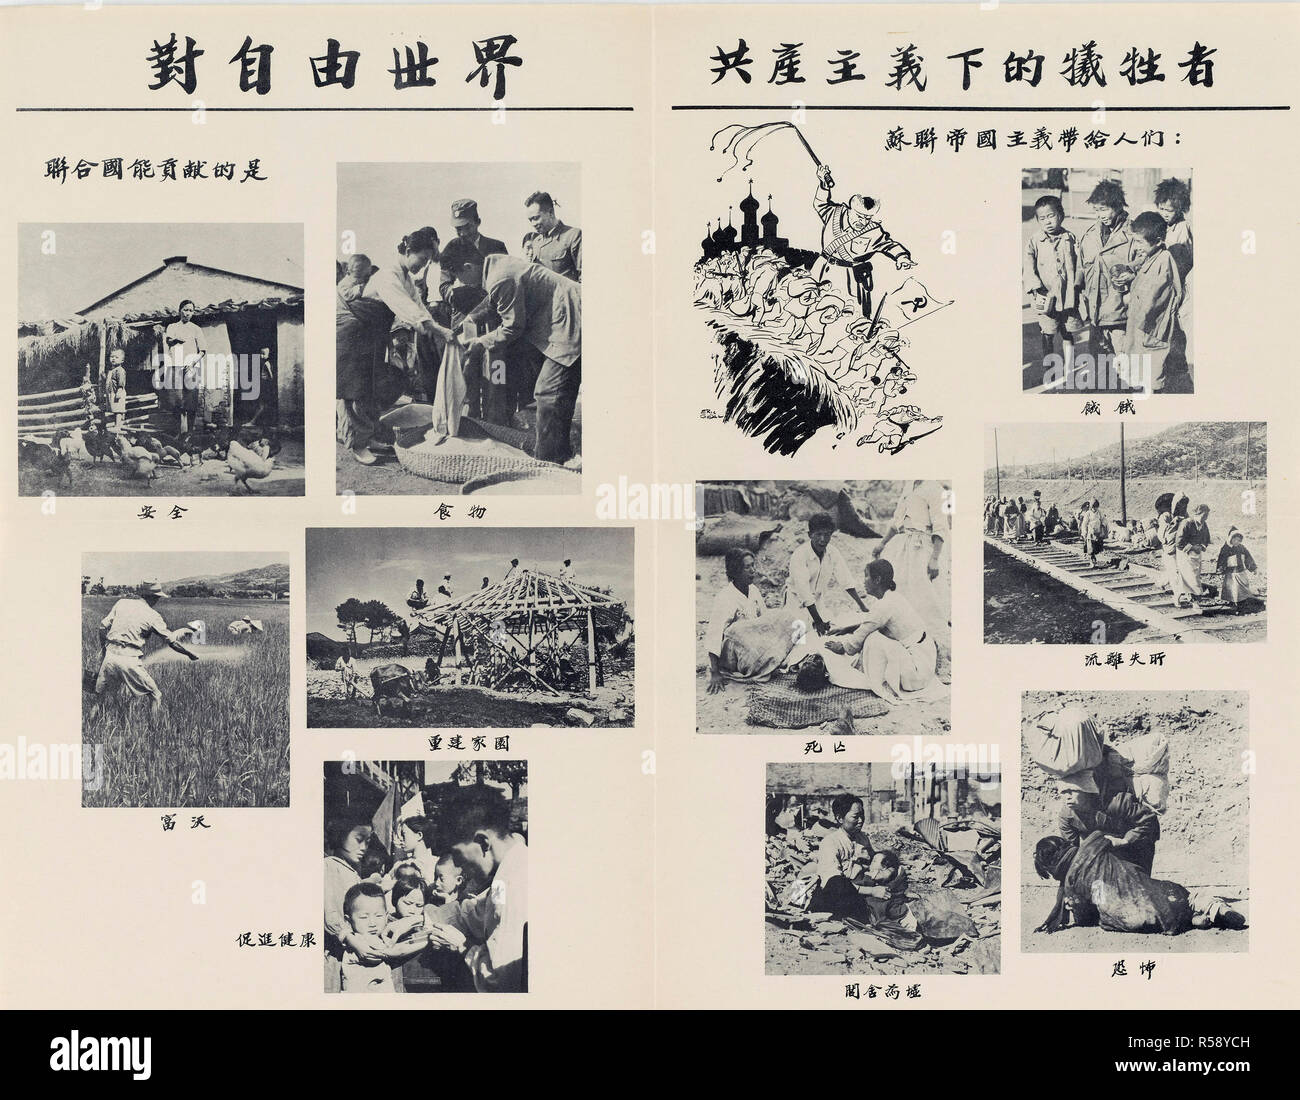 2/14/1952 - U.S. Propaganda Posters in 1950s Asia - For a Free World and Victims of Communism Poster (written in Chinese) Stock Photo